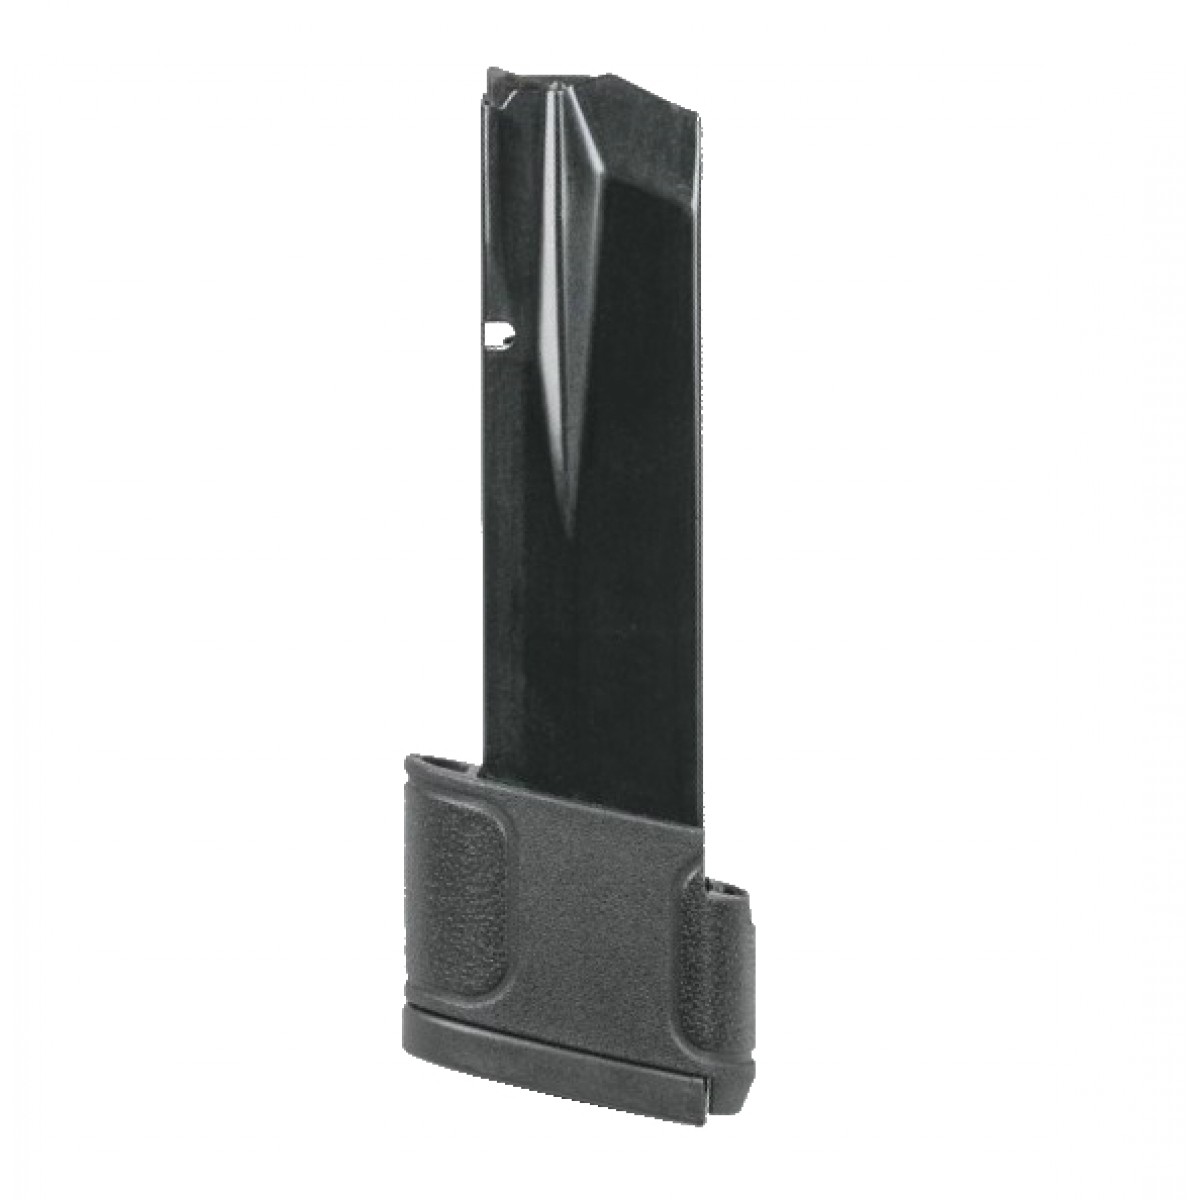 Smith & Wesson M&p 45 Shield Magazine Loader .45 ACP by Hilljak Ql45s Black for sale online 